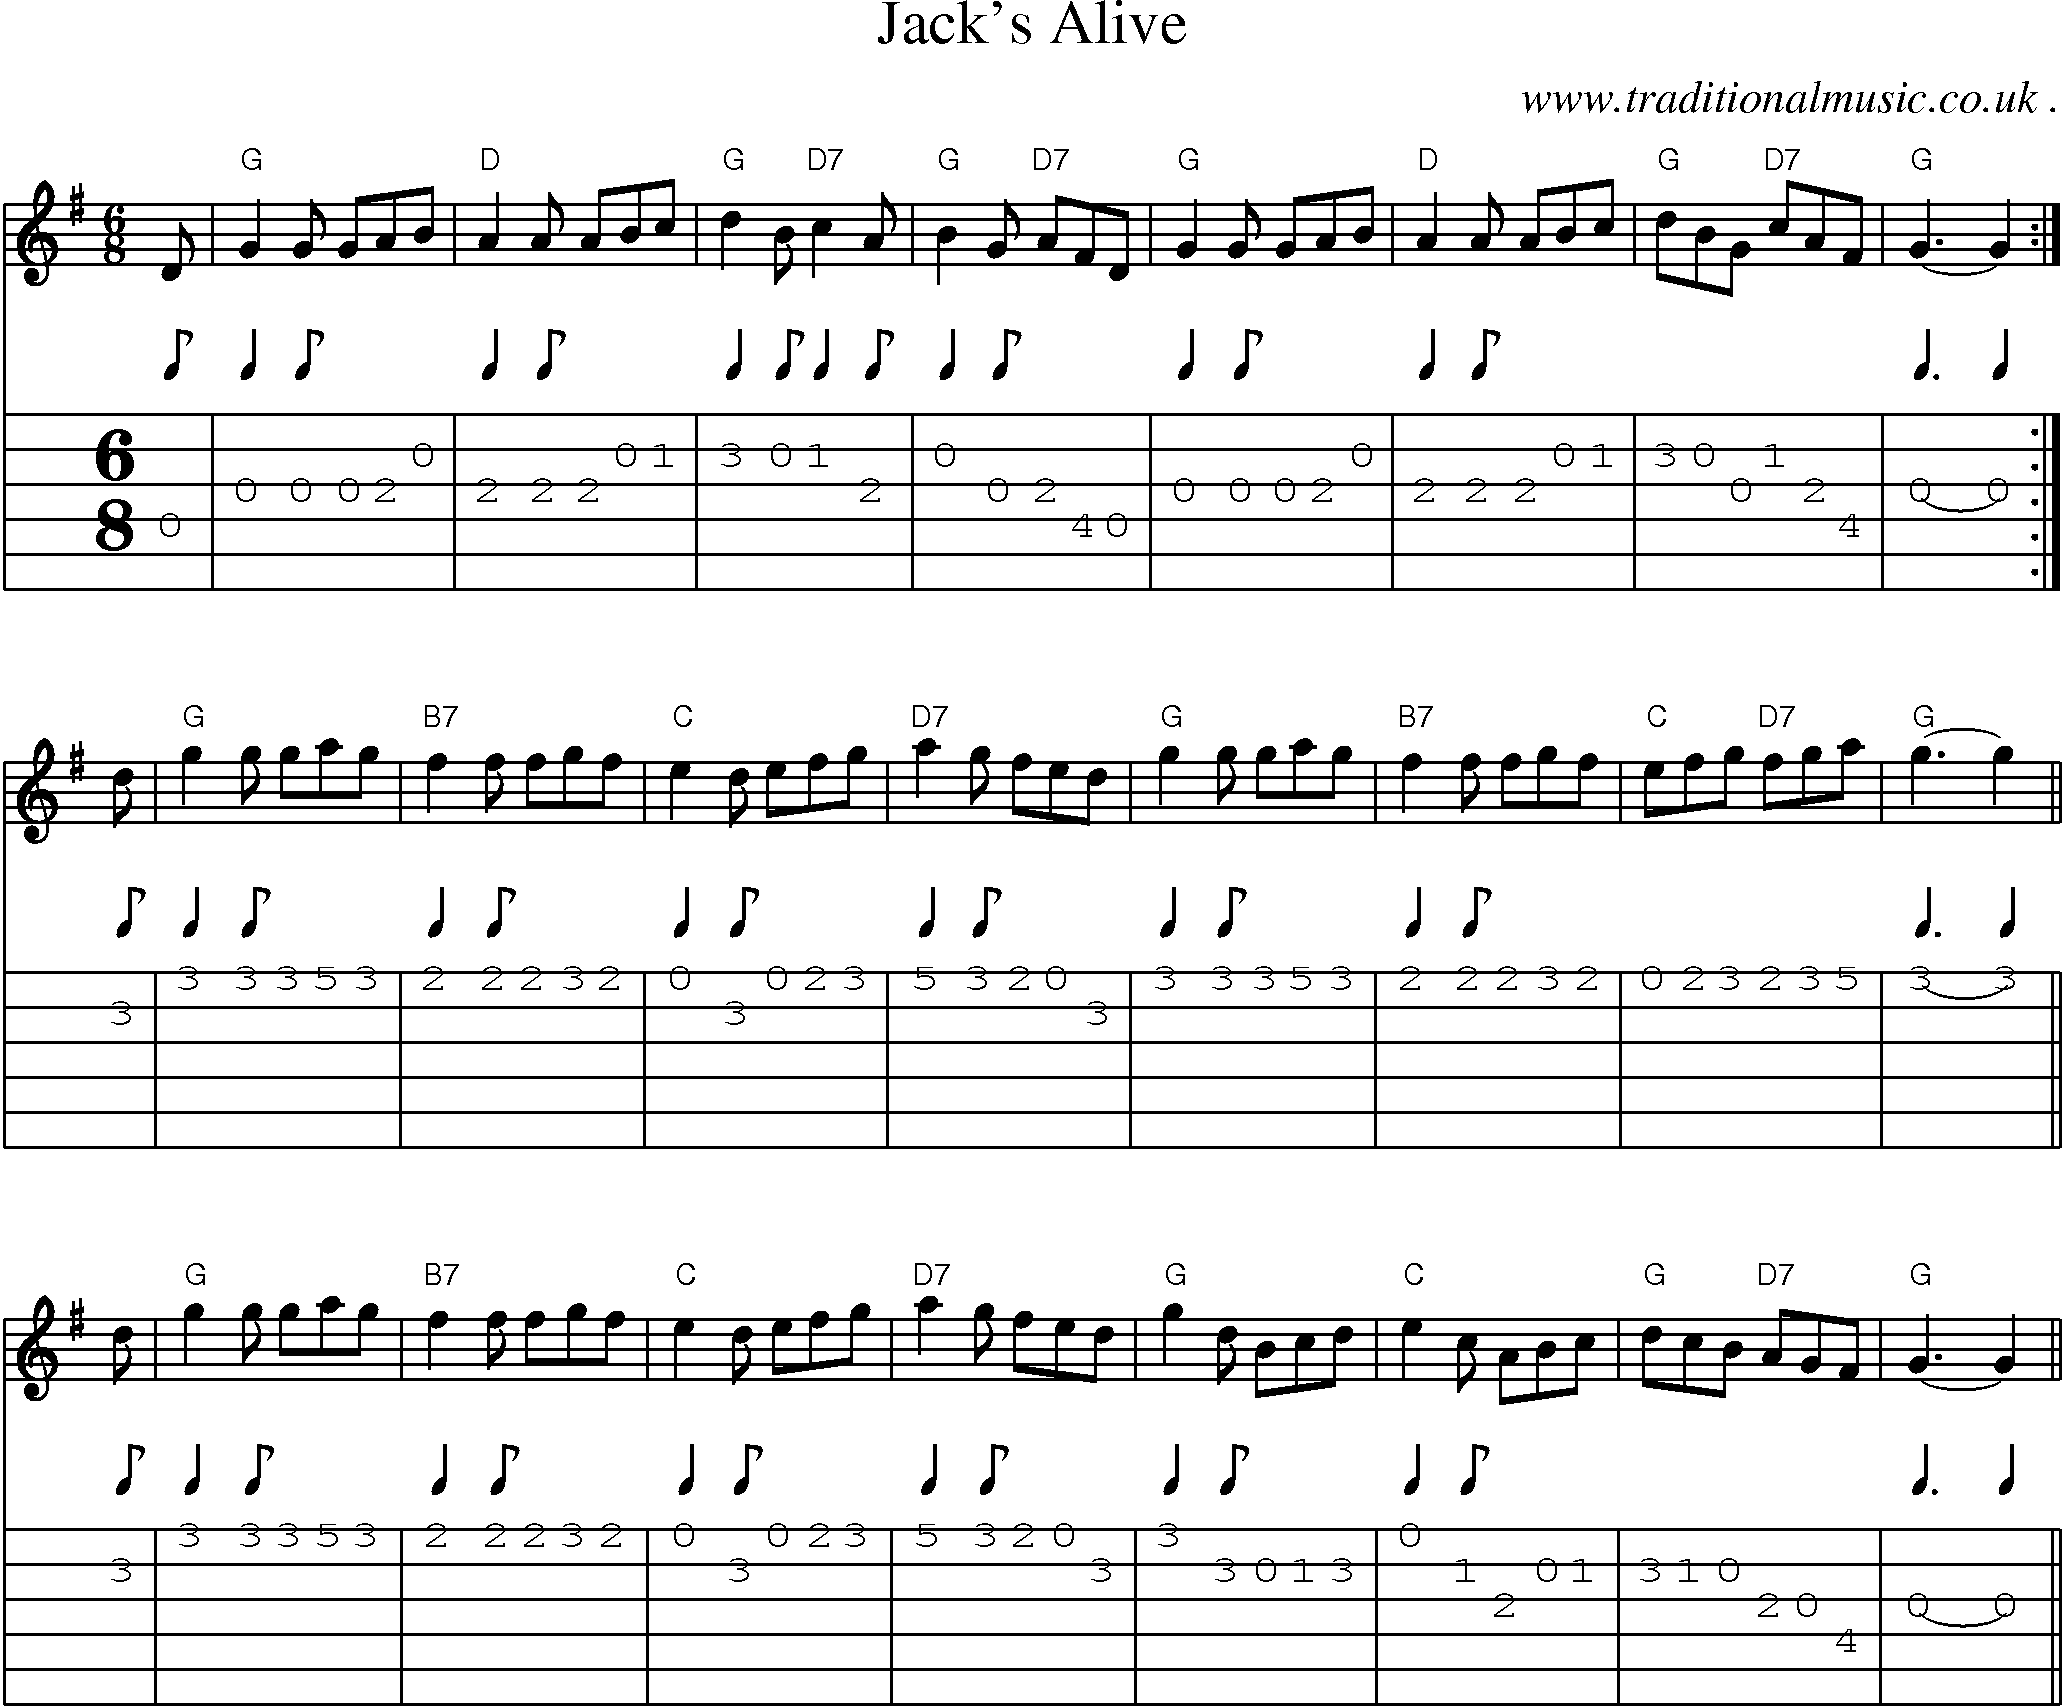 Music Score and Guitar Tabs for Jacks Alive